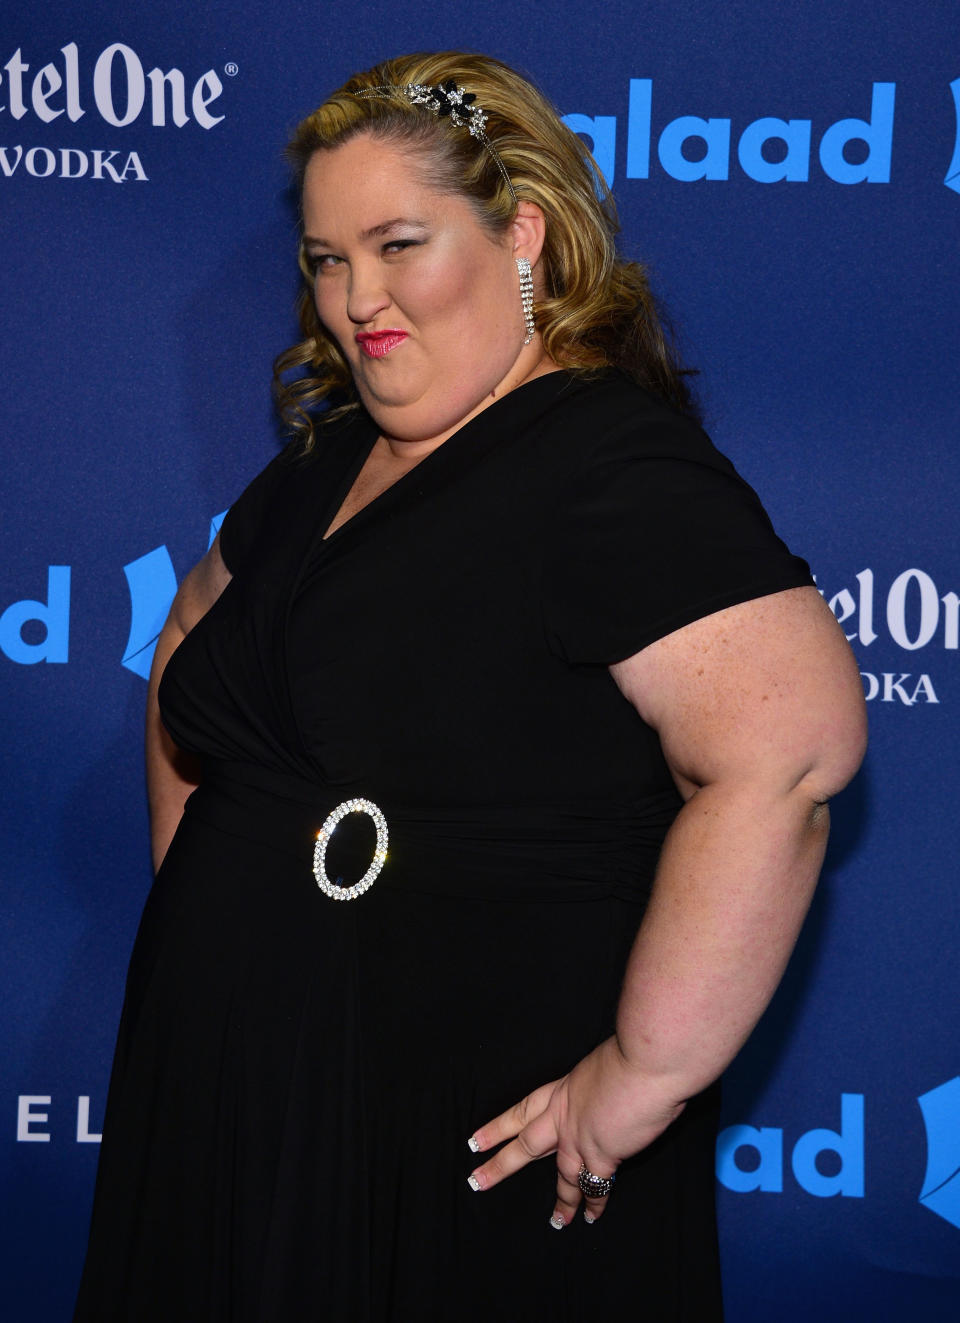 Fans Accuse Mama June Shannon of Wearing Fat Suit